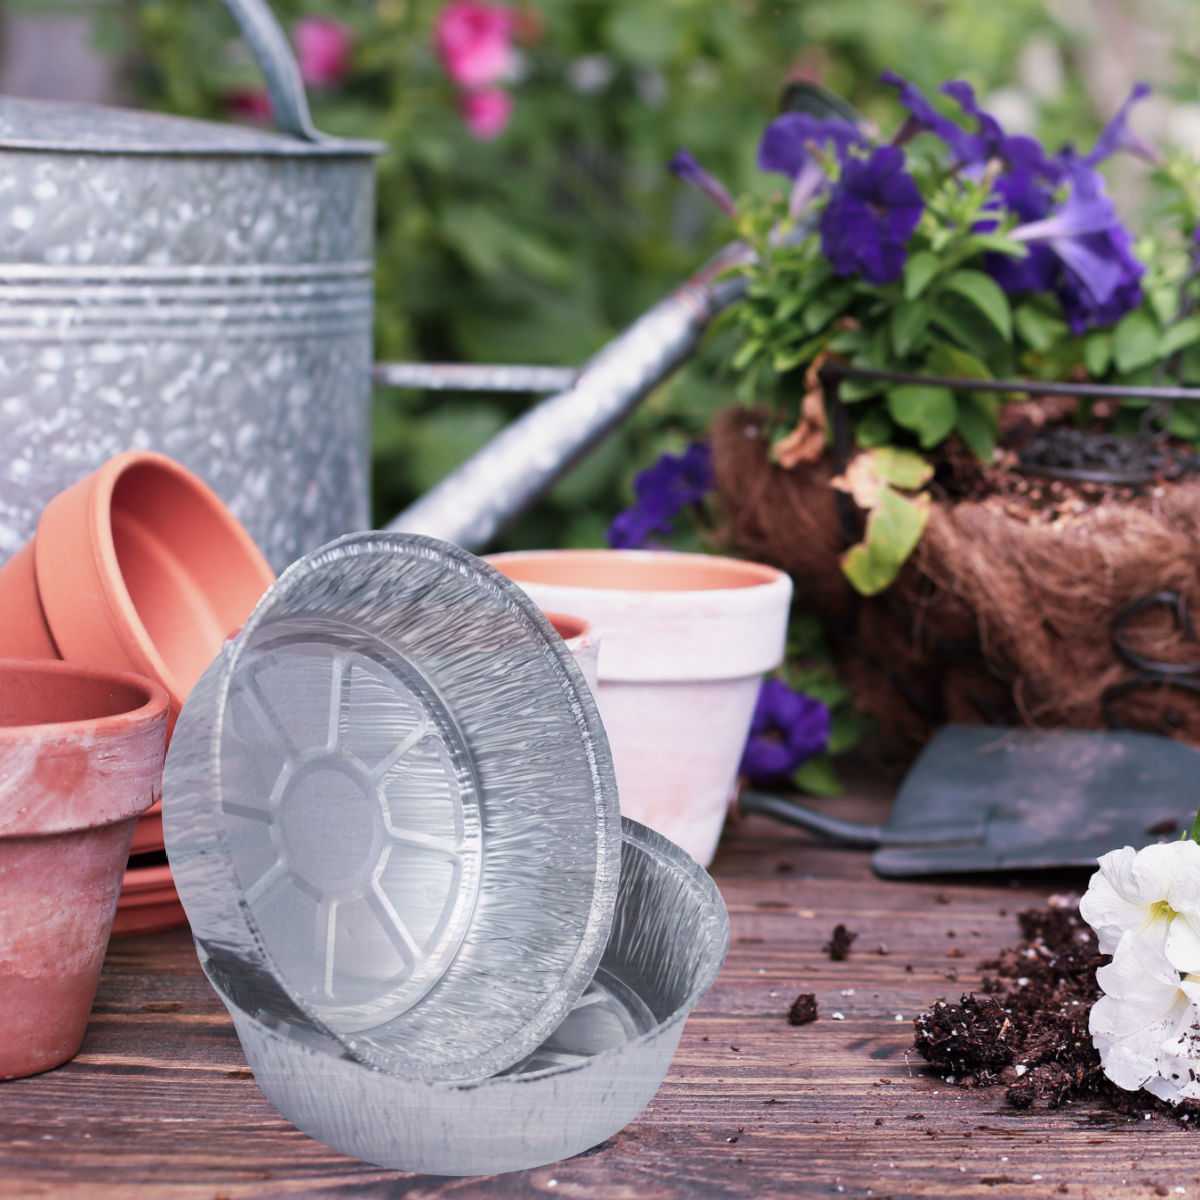 Disposable pie plates on a garden bench with a galvanized watering can and clay pots.